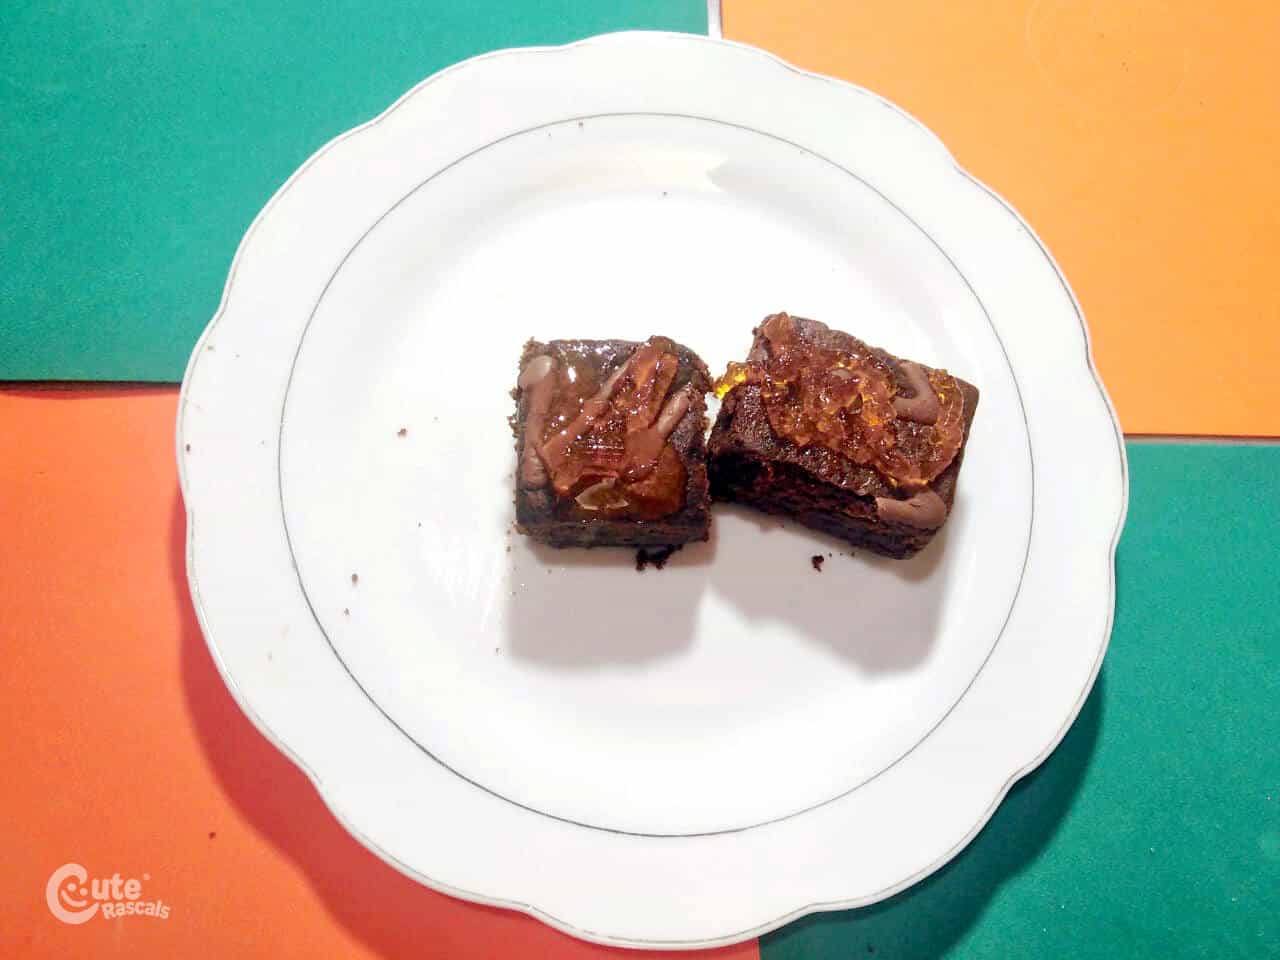 Jelly worms over a brownie